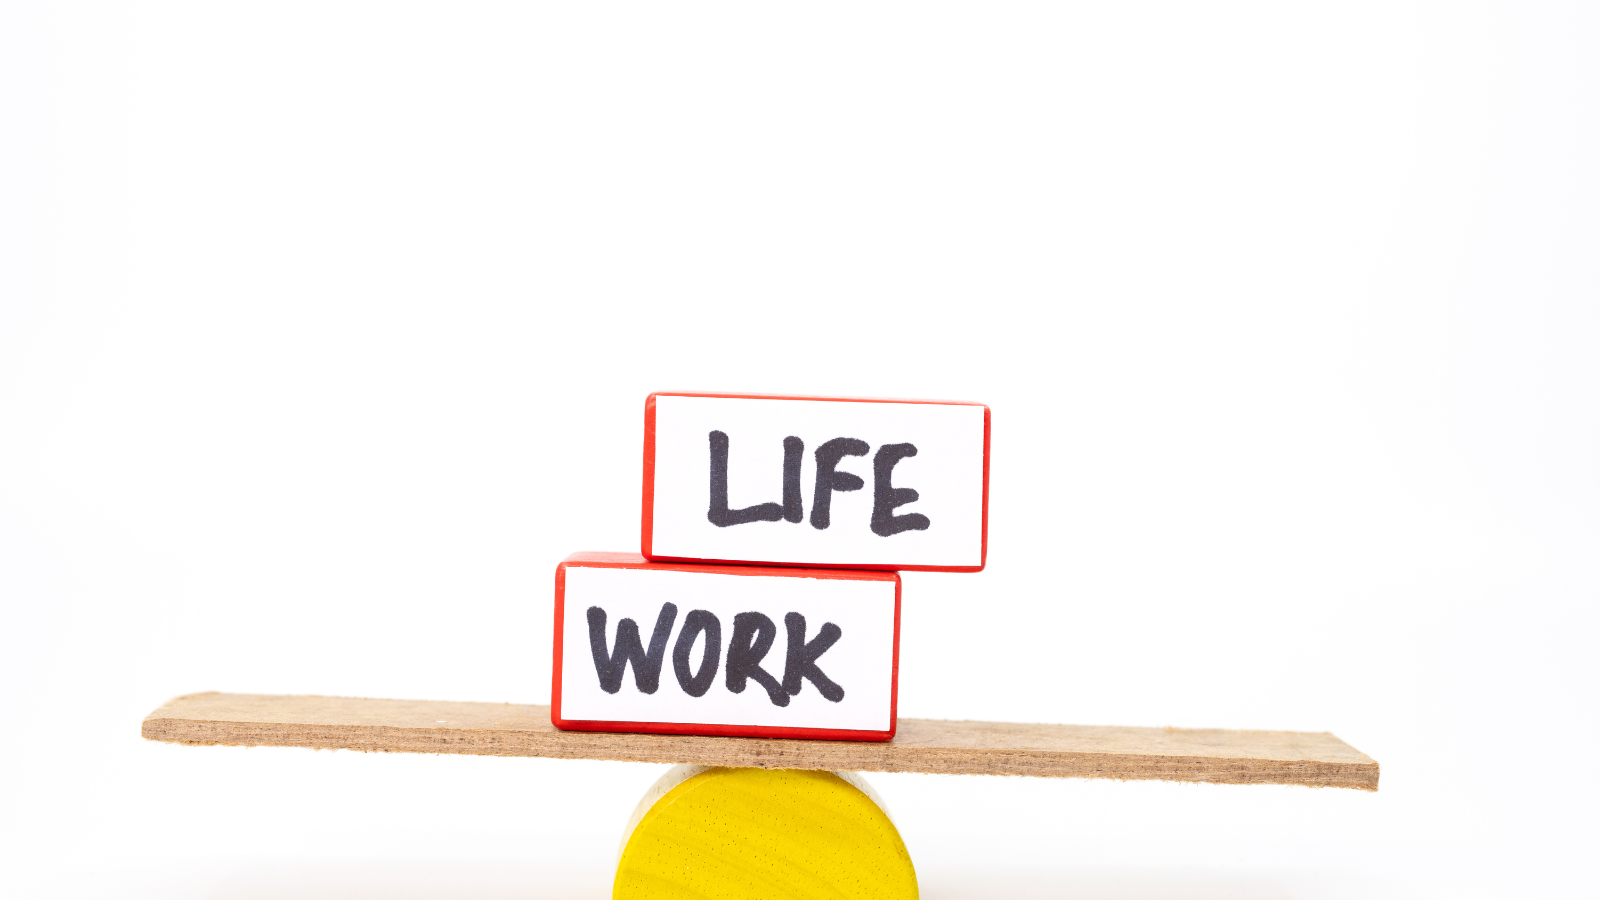 work life balance concept with two blocks representing work and life